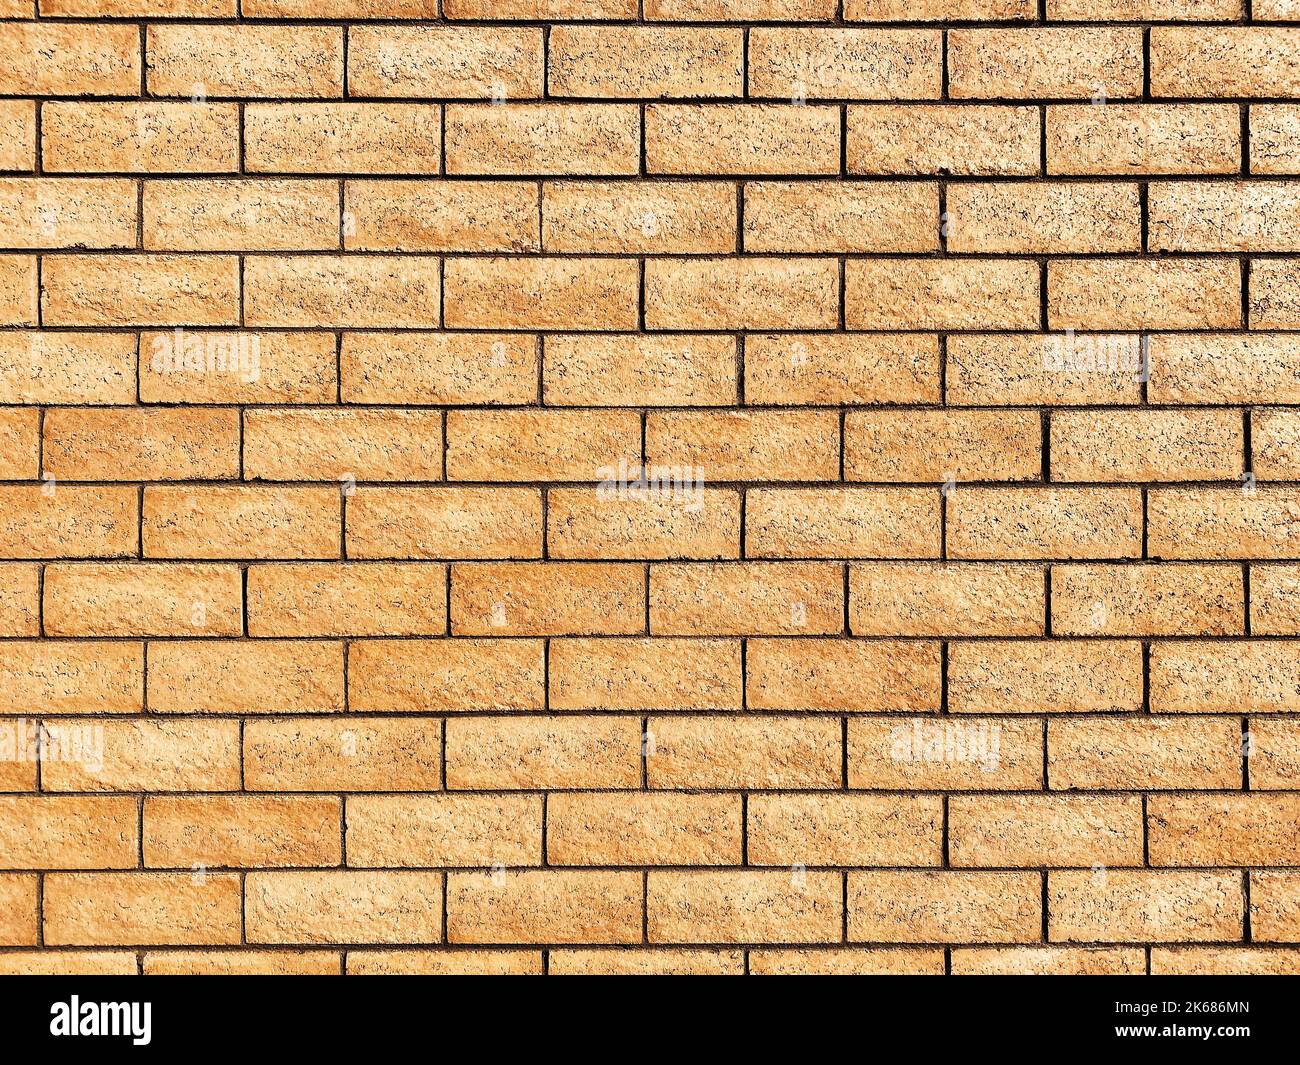 a cinder block wall building brick concrete alley house facade new construction material background strong strength structure built barrier backdrop Stock Photo